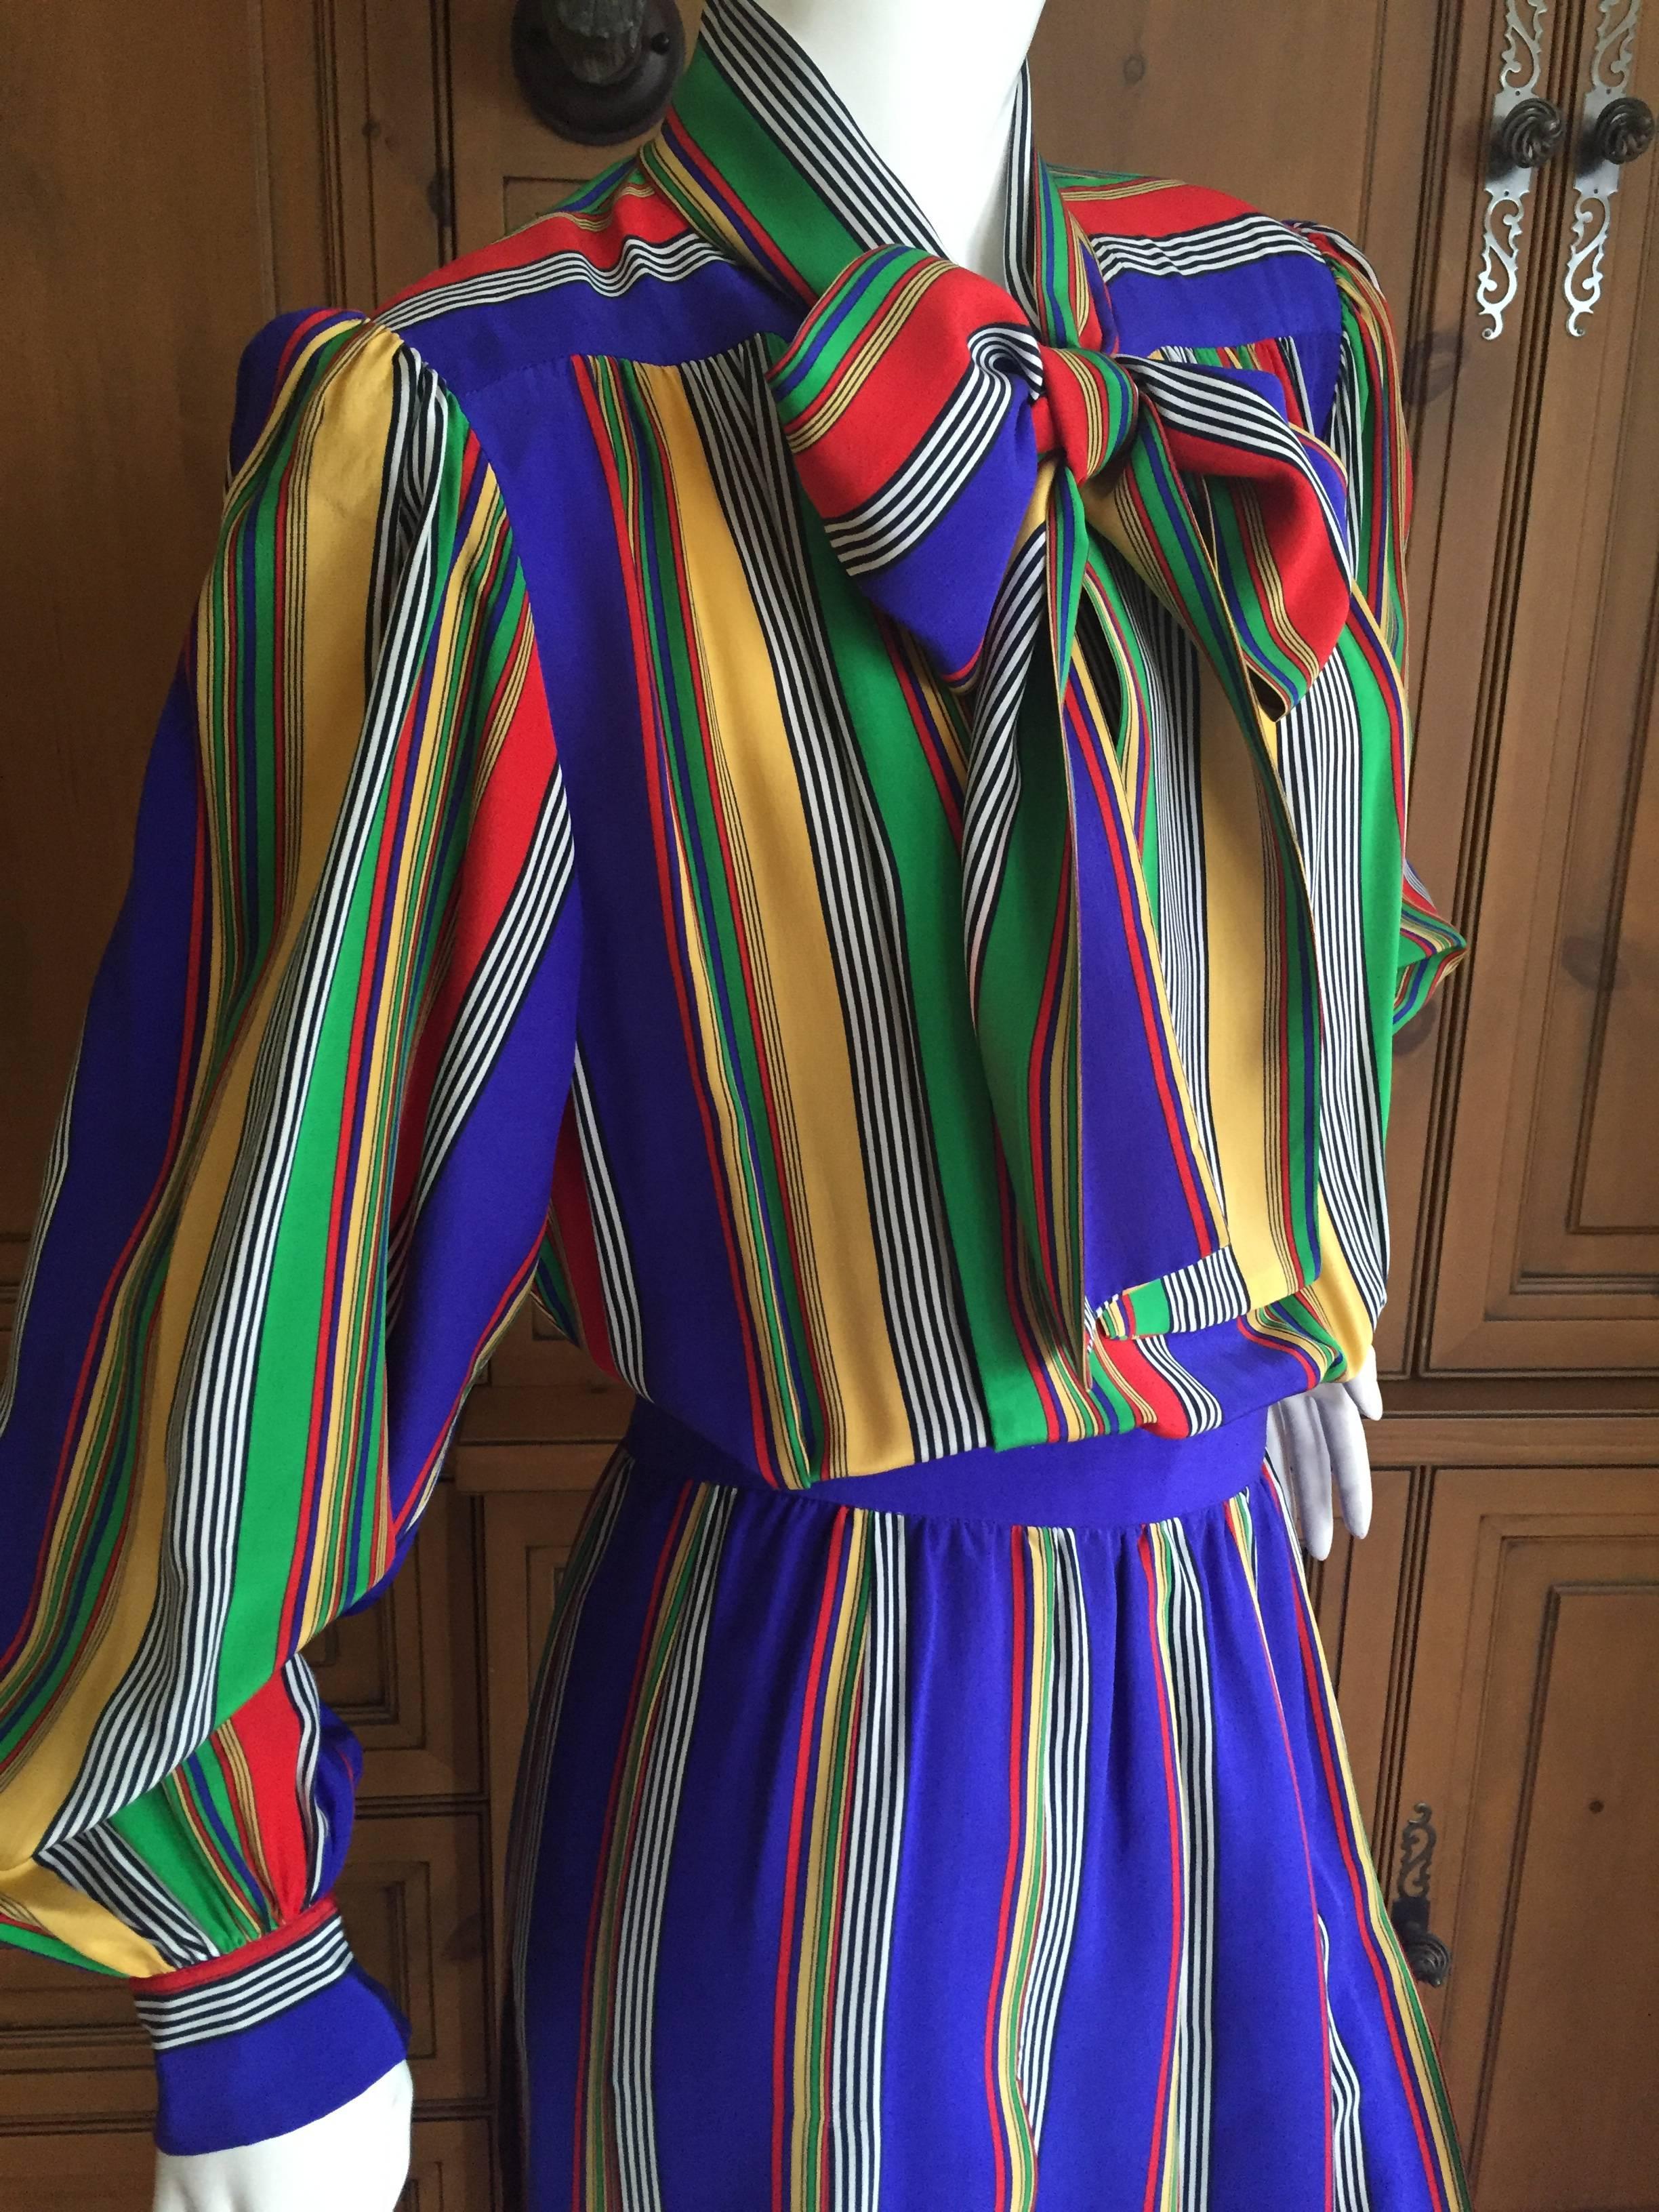 Yves Saint Laurent Rive Gauche 1970's Stripe Silk Day Dress with Bow For Sale 1